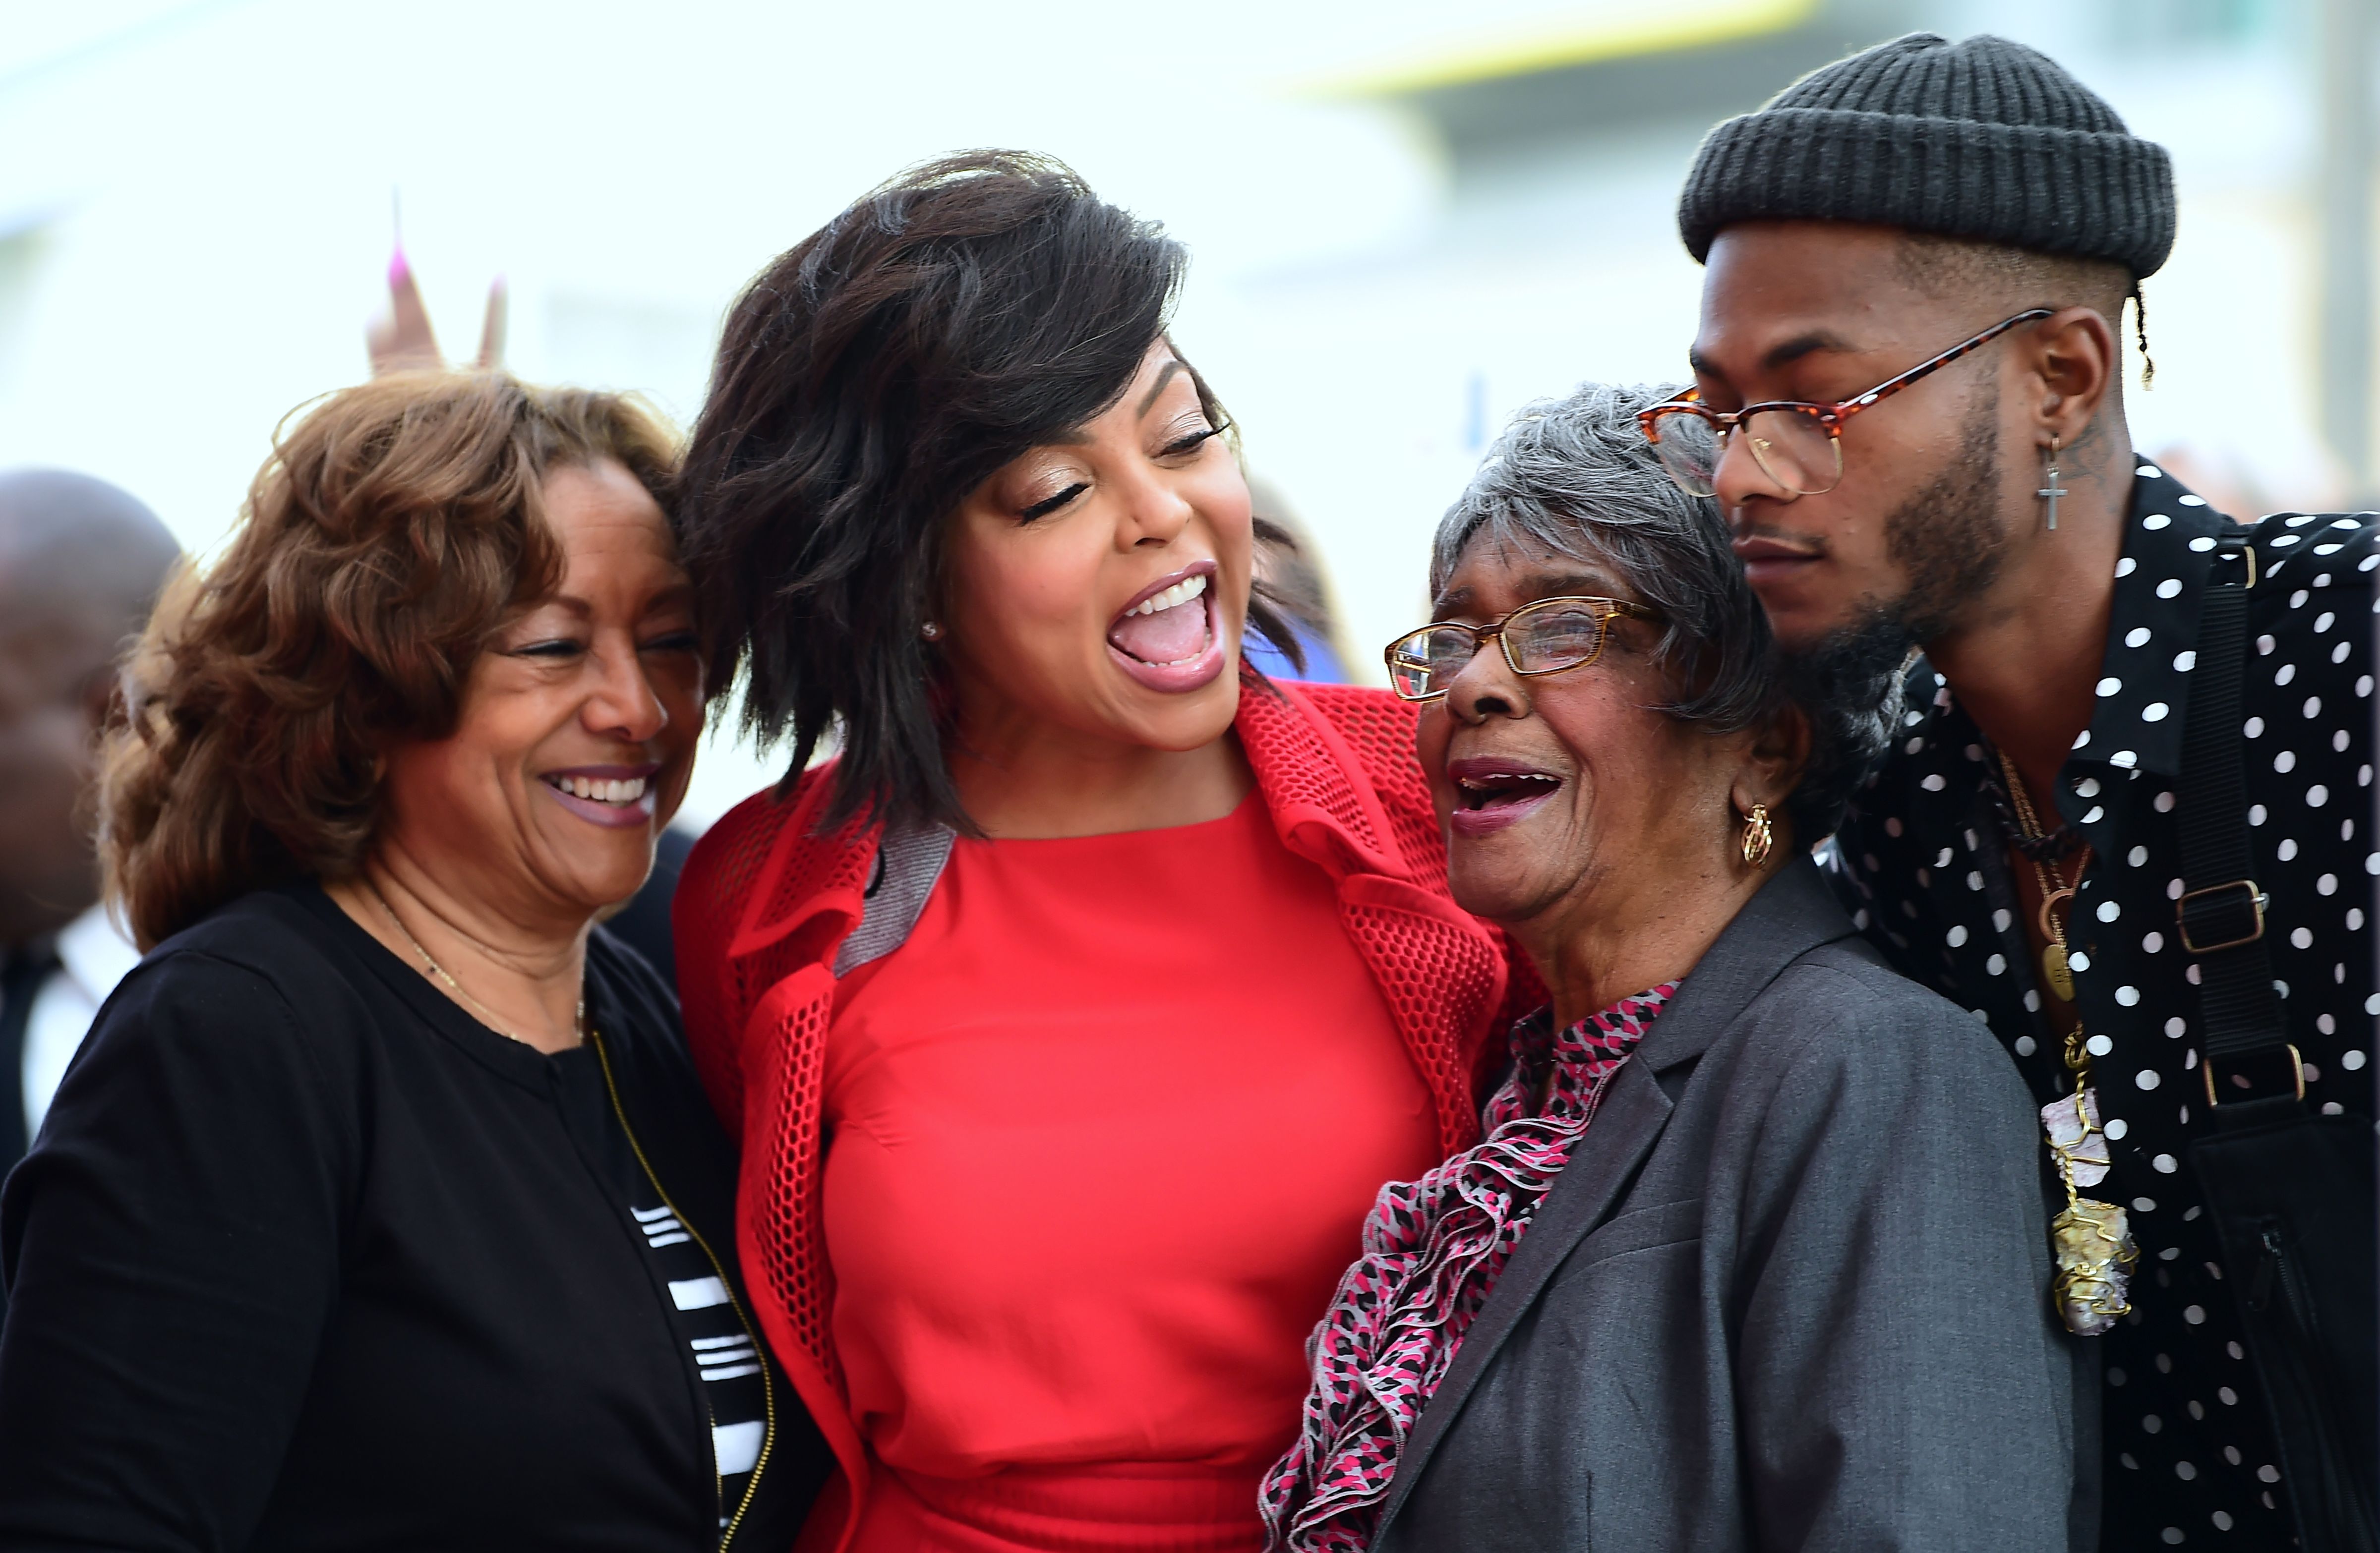 Taraji P. Henson poses with her mother, grandmother and son during Henson's Hollywood Walk of Fame Star ceremony on January 28, 2019, in Hollywood, California | Source: Getty Images